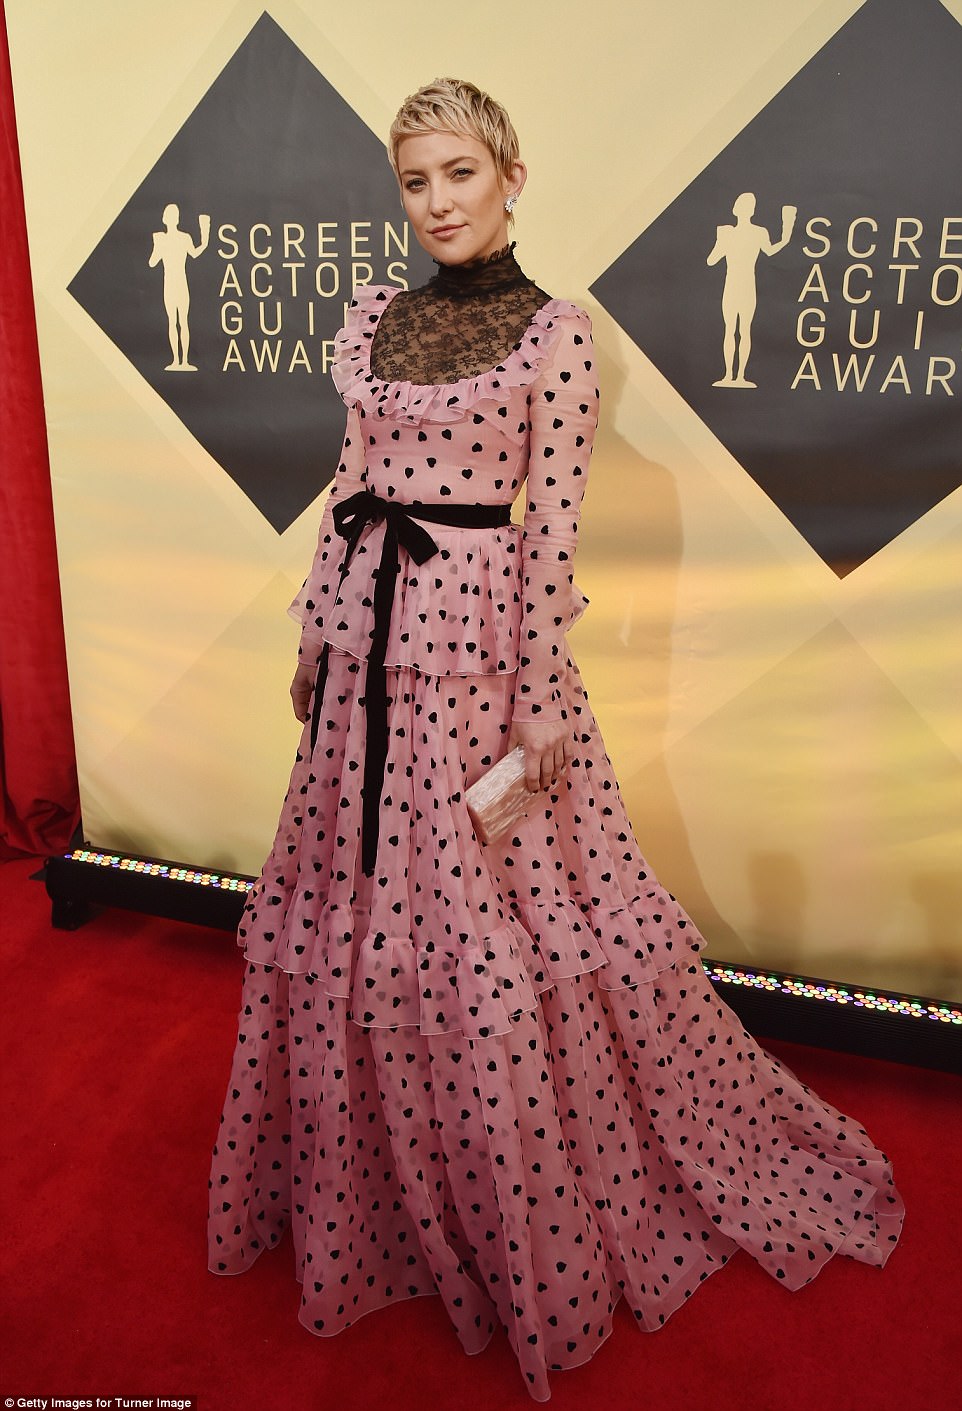 486D332A00000578-0-Topping_the_list_Kate_Hudson_s_bright_pink_gown_had_social_media-a-66_1516581730419